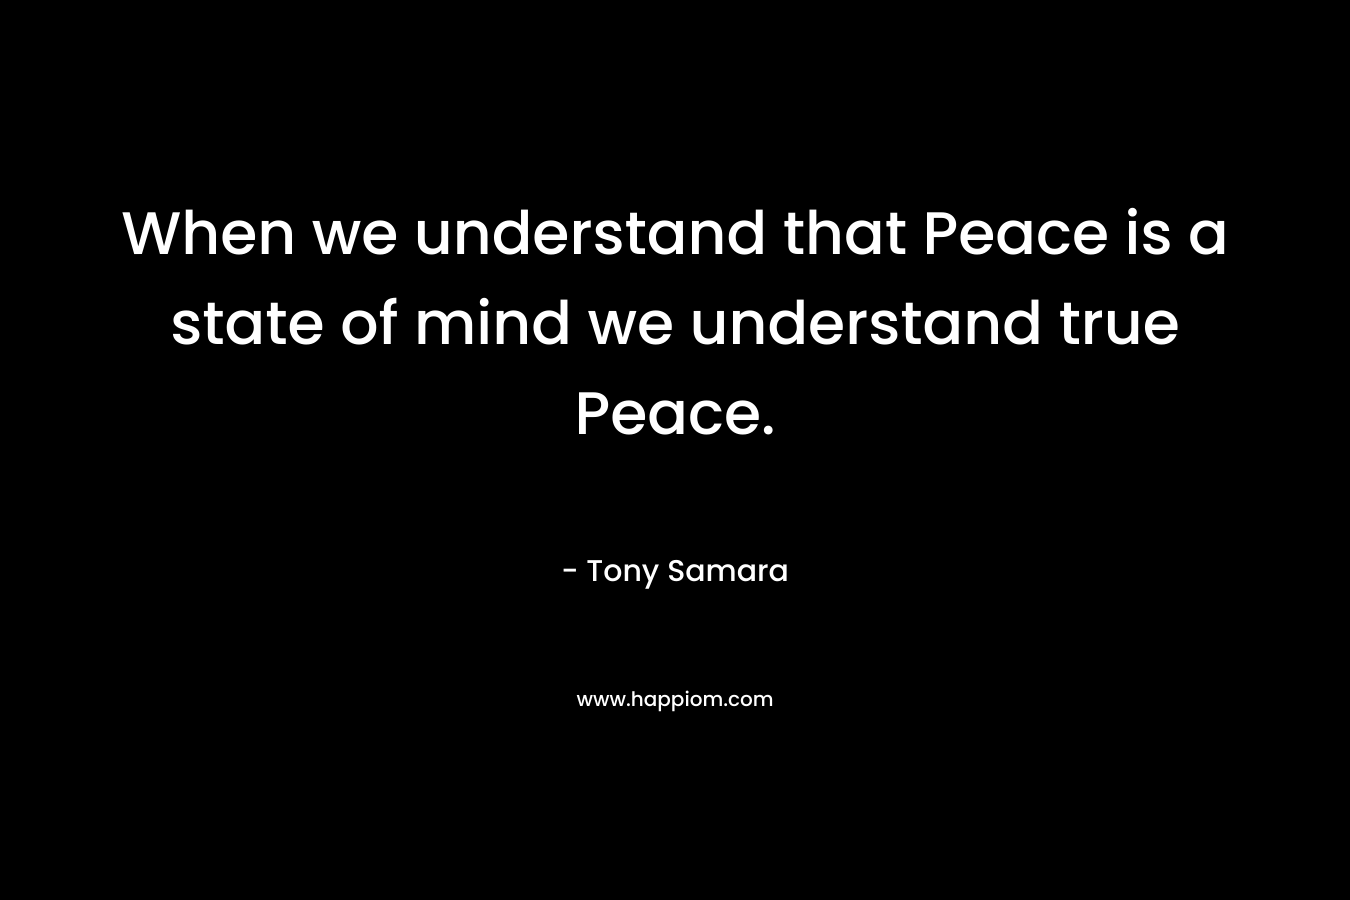 When we understand that Peace is a state of mind we understand true Peace.